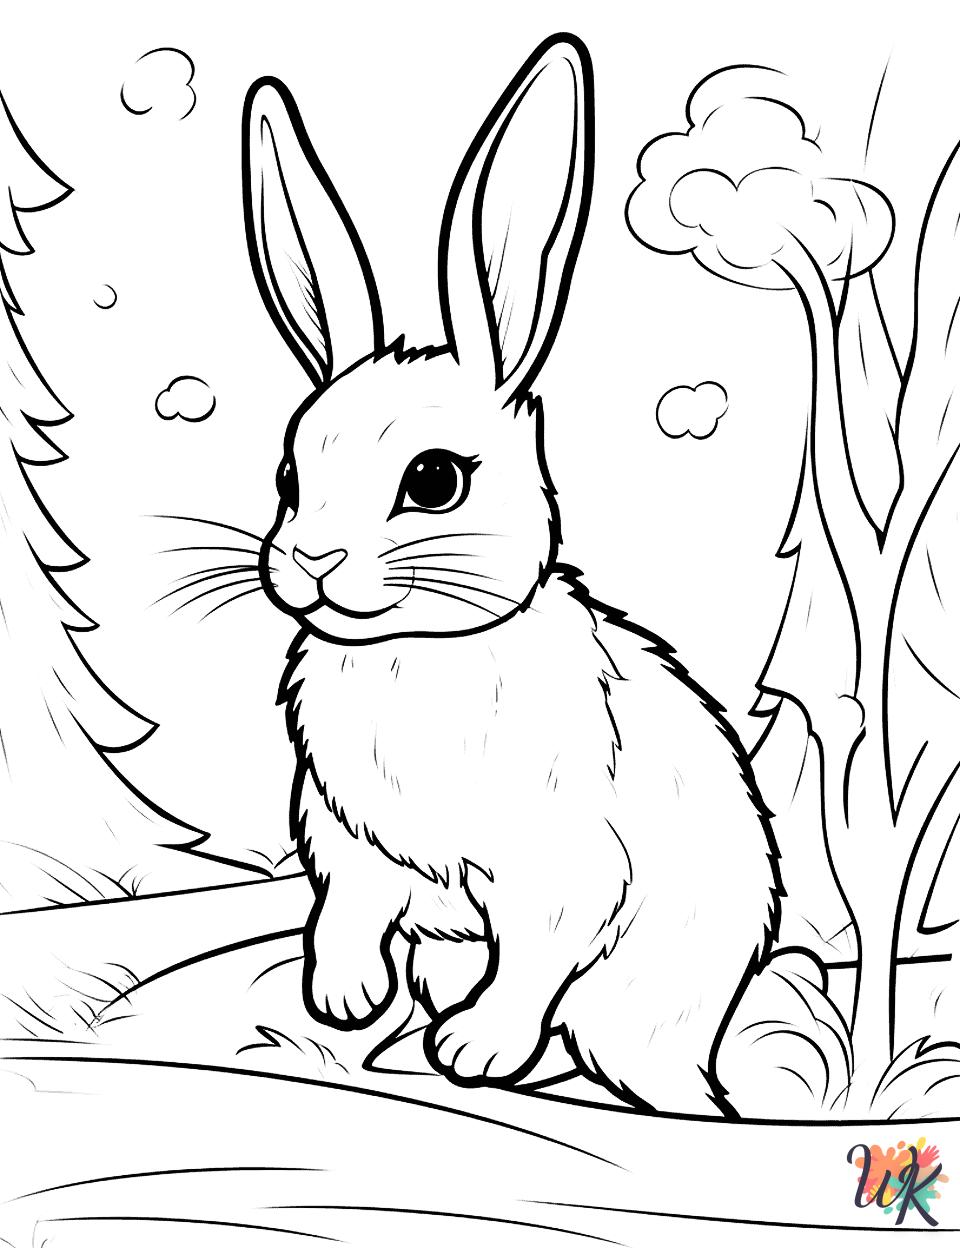 Rabbits decorations coloring pages